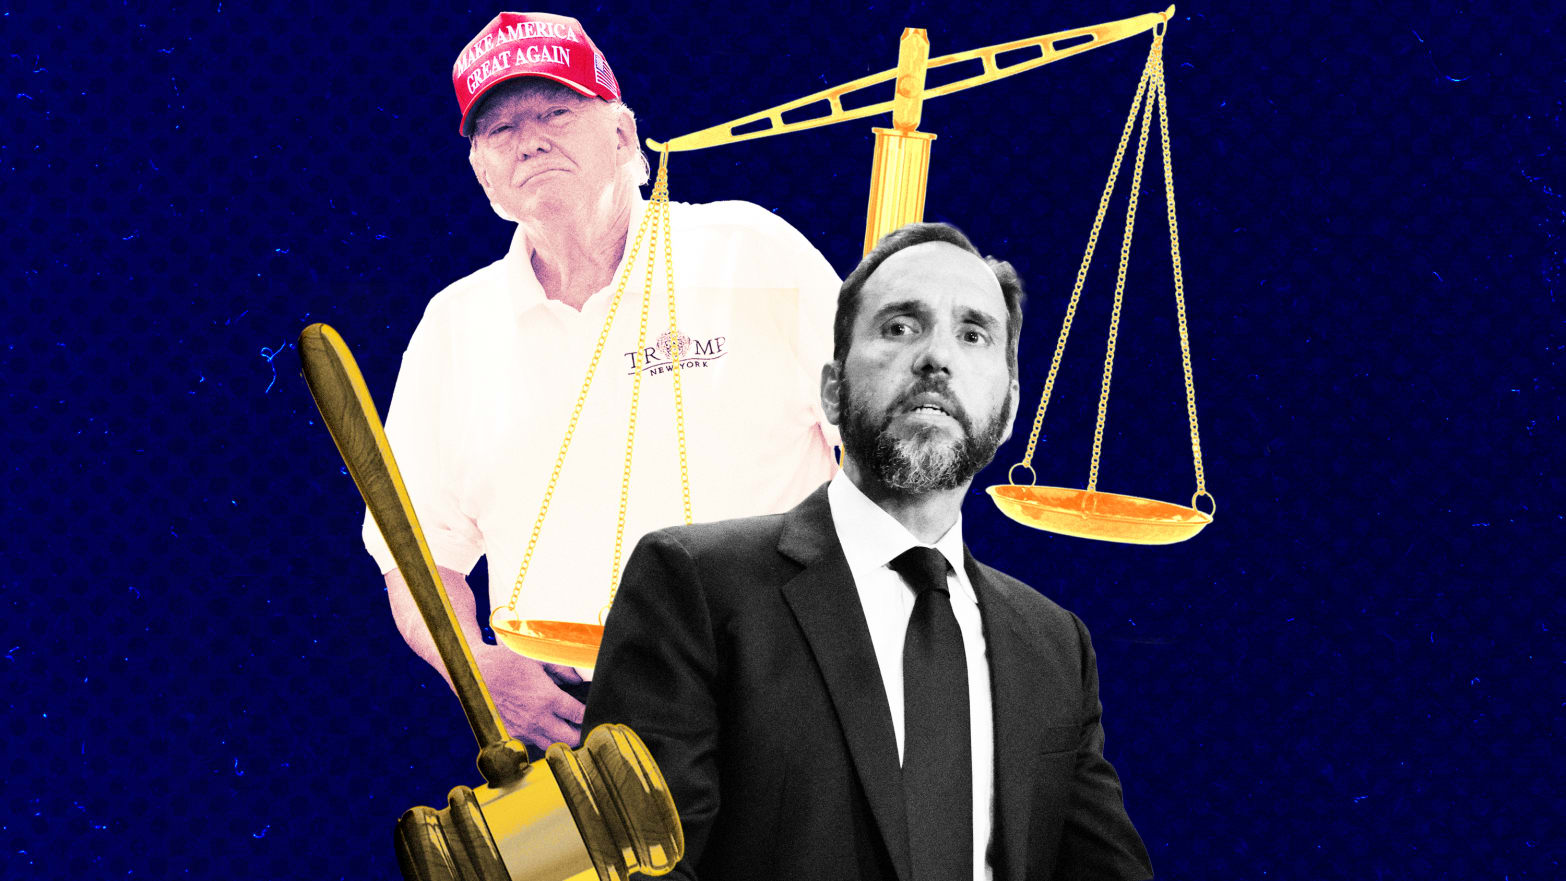 Jack Smith: The special prosecutor who could take down Trump